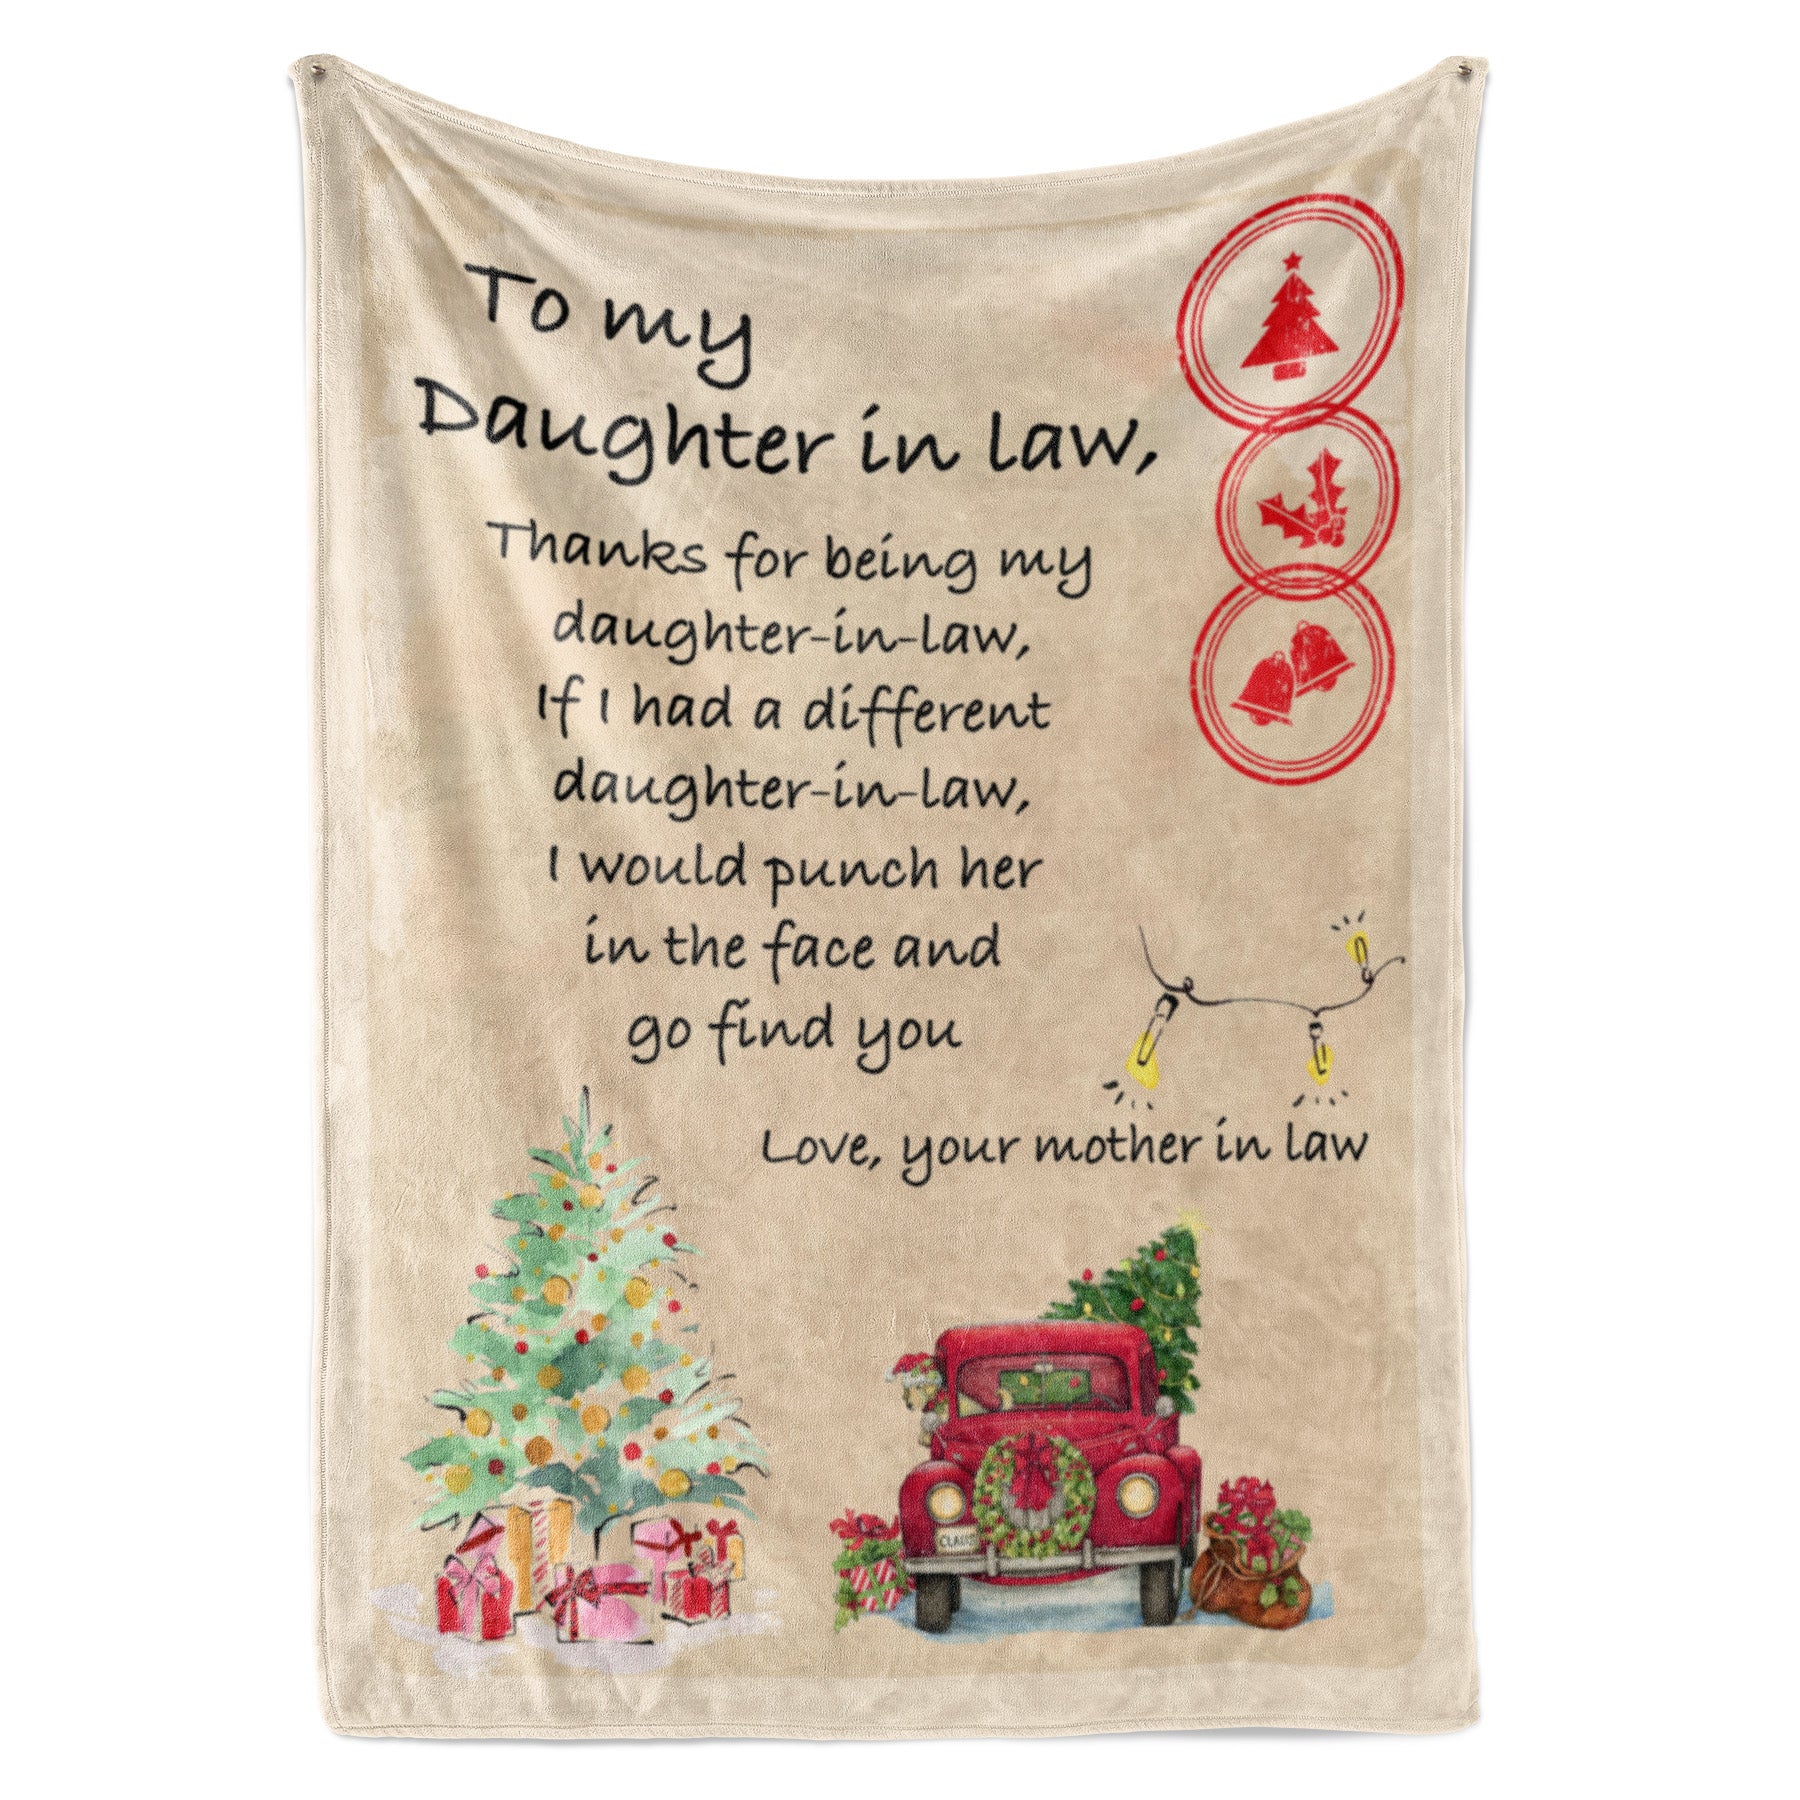 Christmas Blanket Gift For Daughter In Law, Personalized Gifts Daughter In Law, Thanks For being